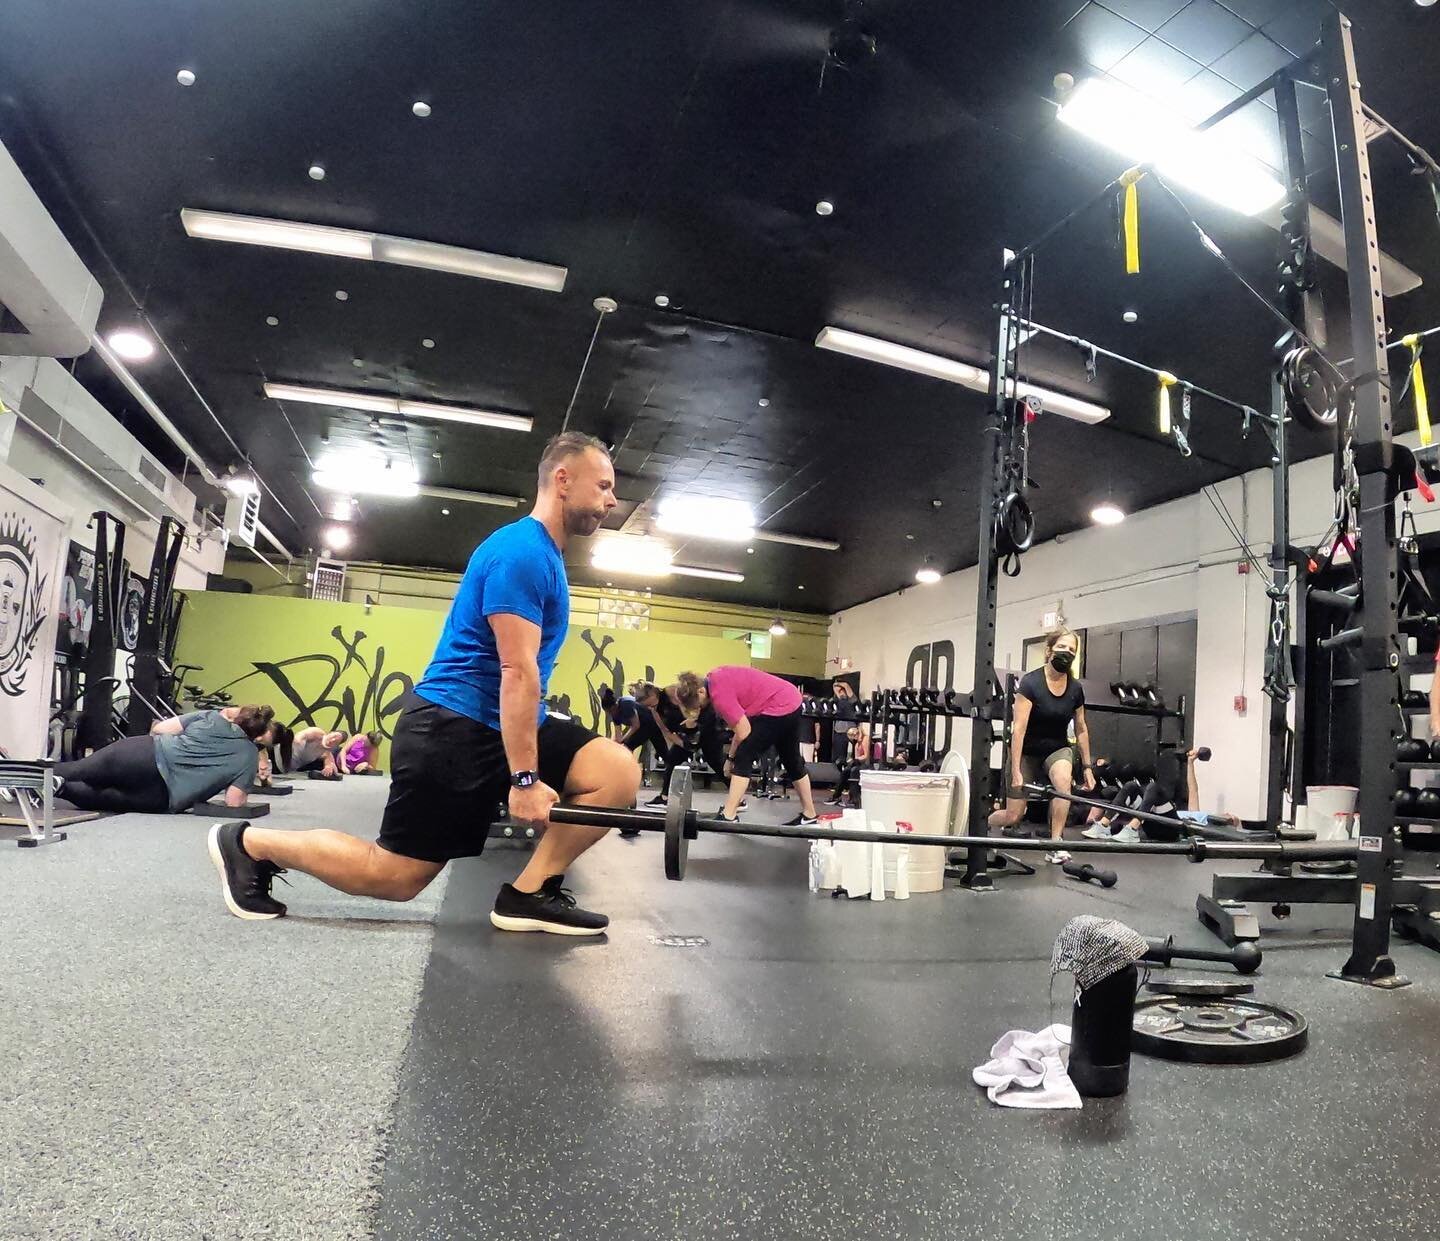 That AMGRAP workout tho...🔥

==========================

◾️Interested in joining us? Follow the link below for enrollment details. Let&rsquo;s get you started on your FREE first week!

http://bileaubuilt.com/reserving-a-class/

#bileaubuilt #goodrep